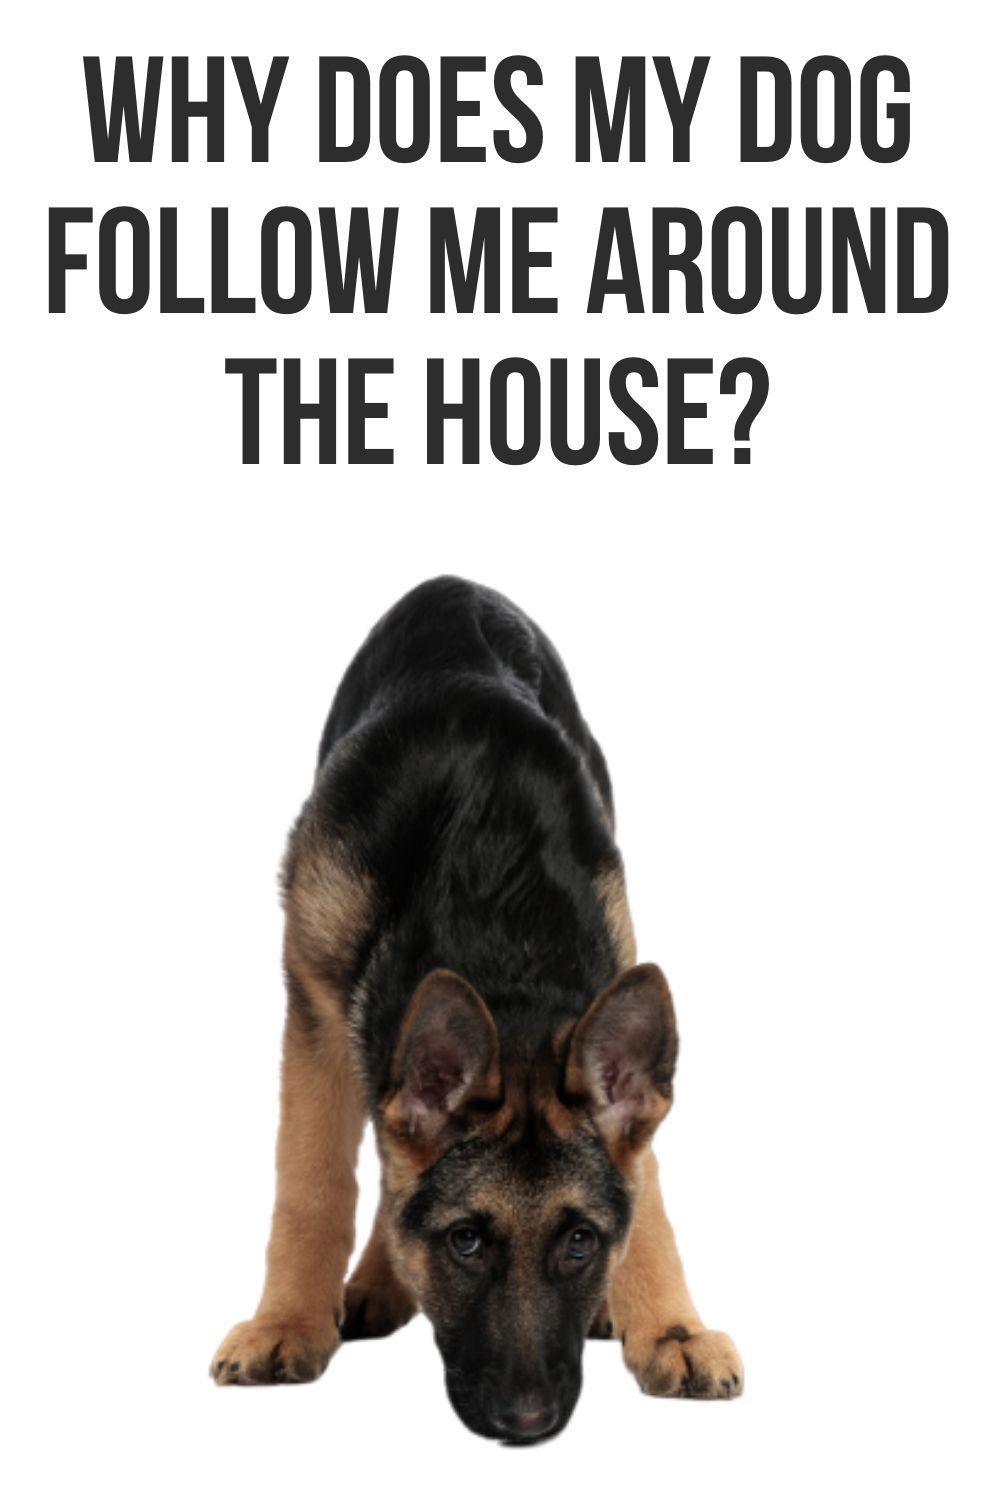 Why does my dog follow me around the house?